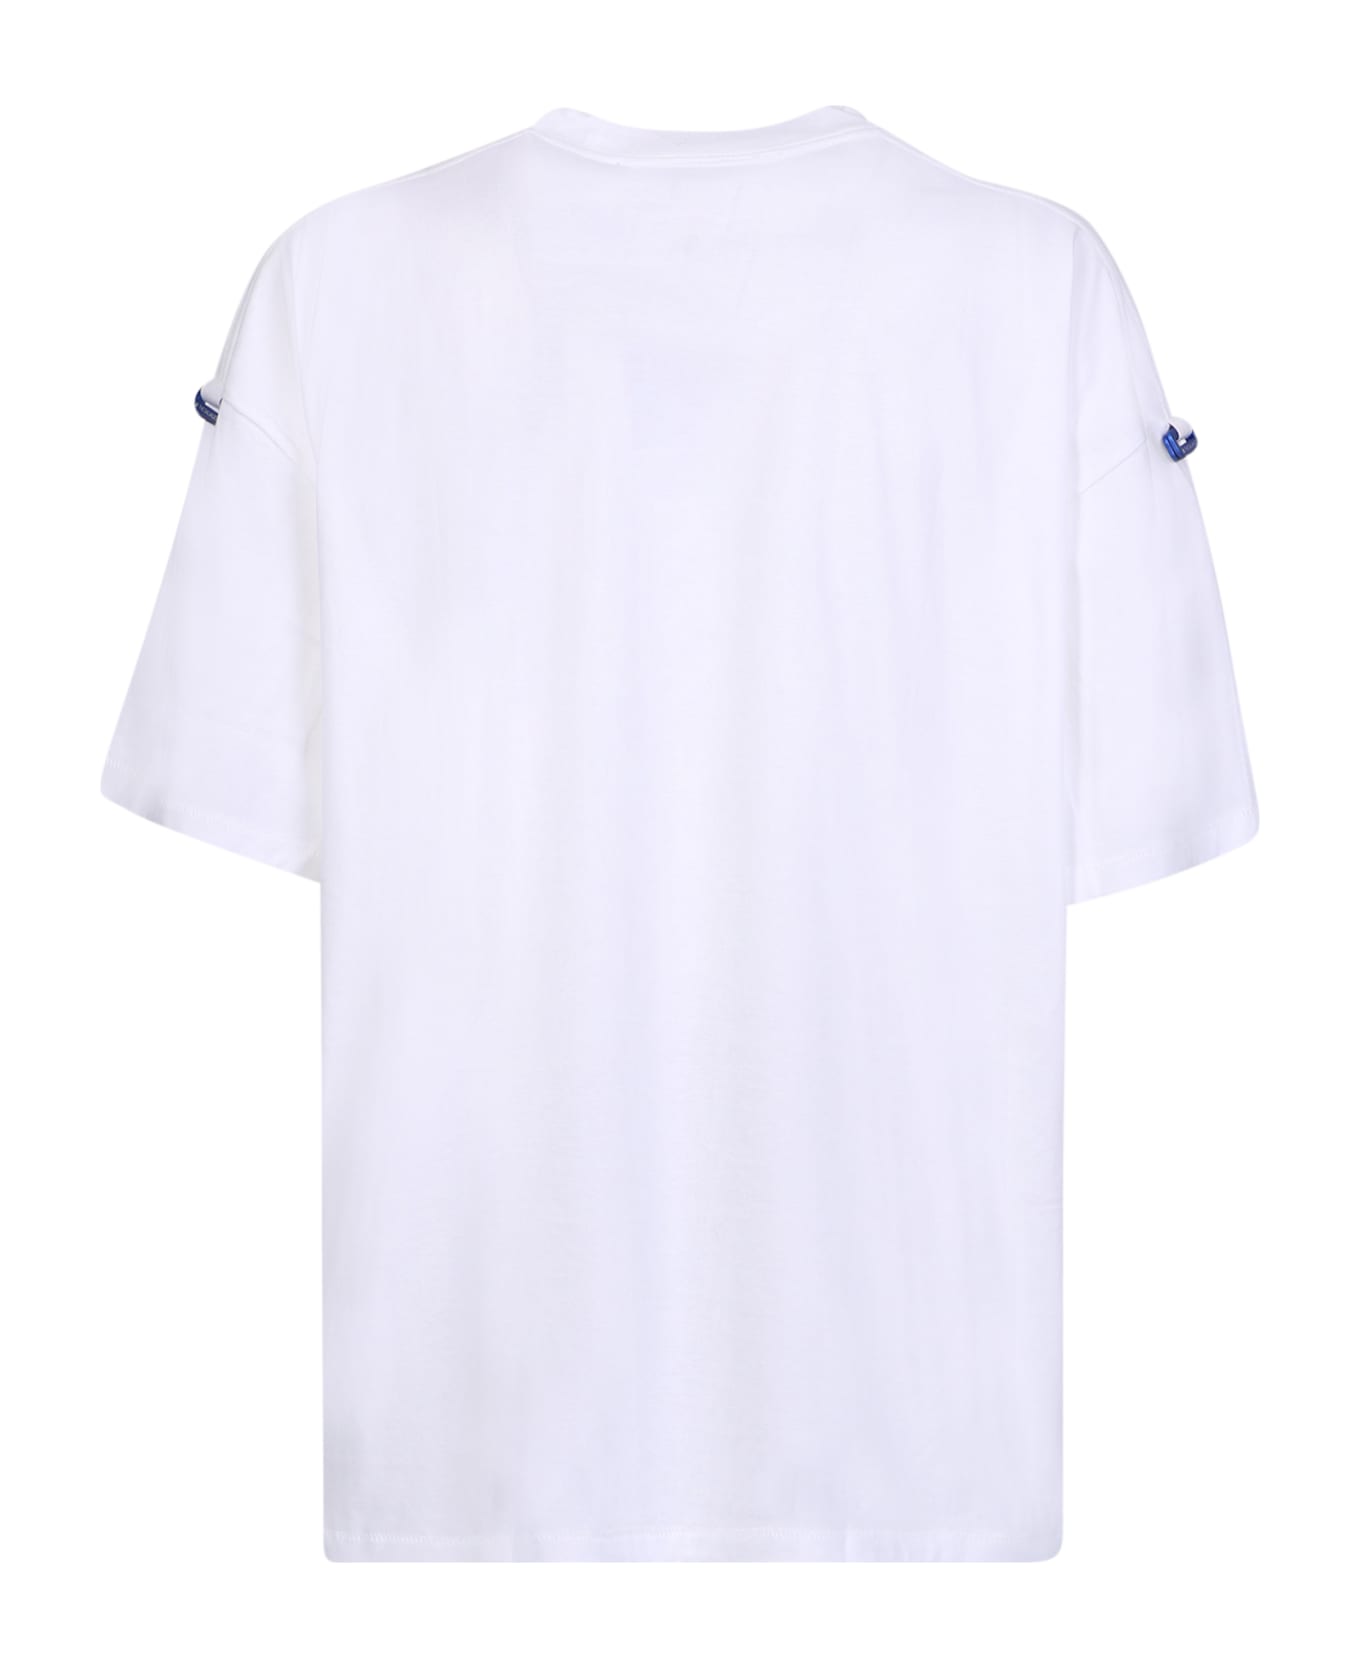 The Salvages White From & Function D-ring T-shirt - White